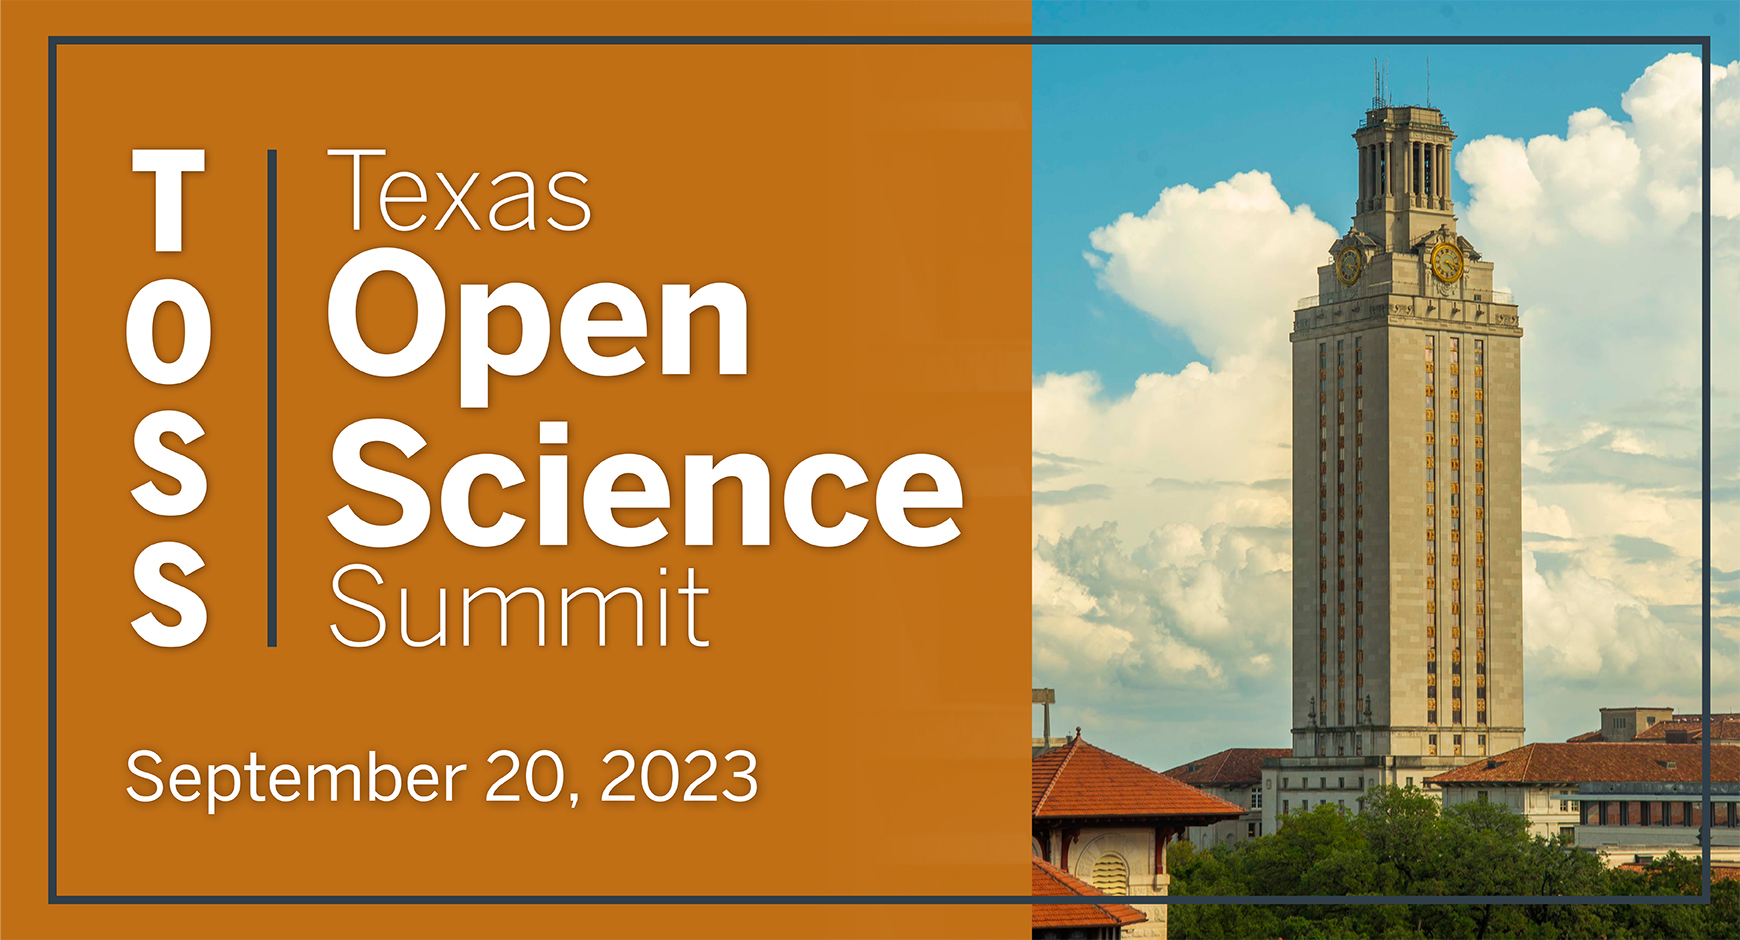 The image is an event graphic. It consists of an orange field to left and a color image of the UT Tower on the right. The words "Texas Open Science Summit; September 20, 2023" are printed on the orange portion.